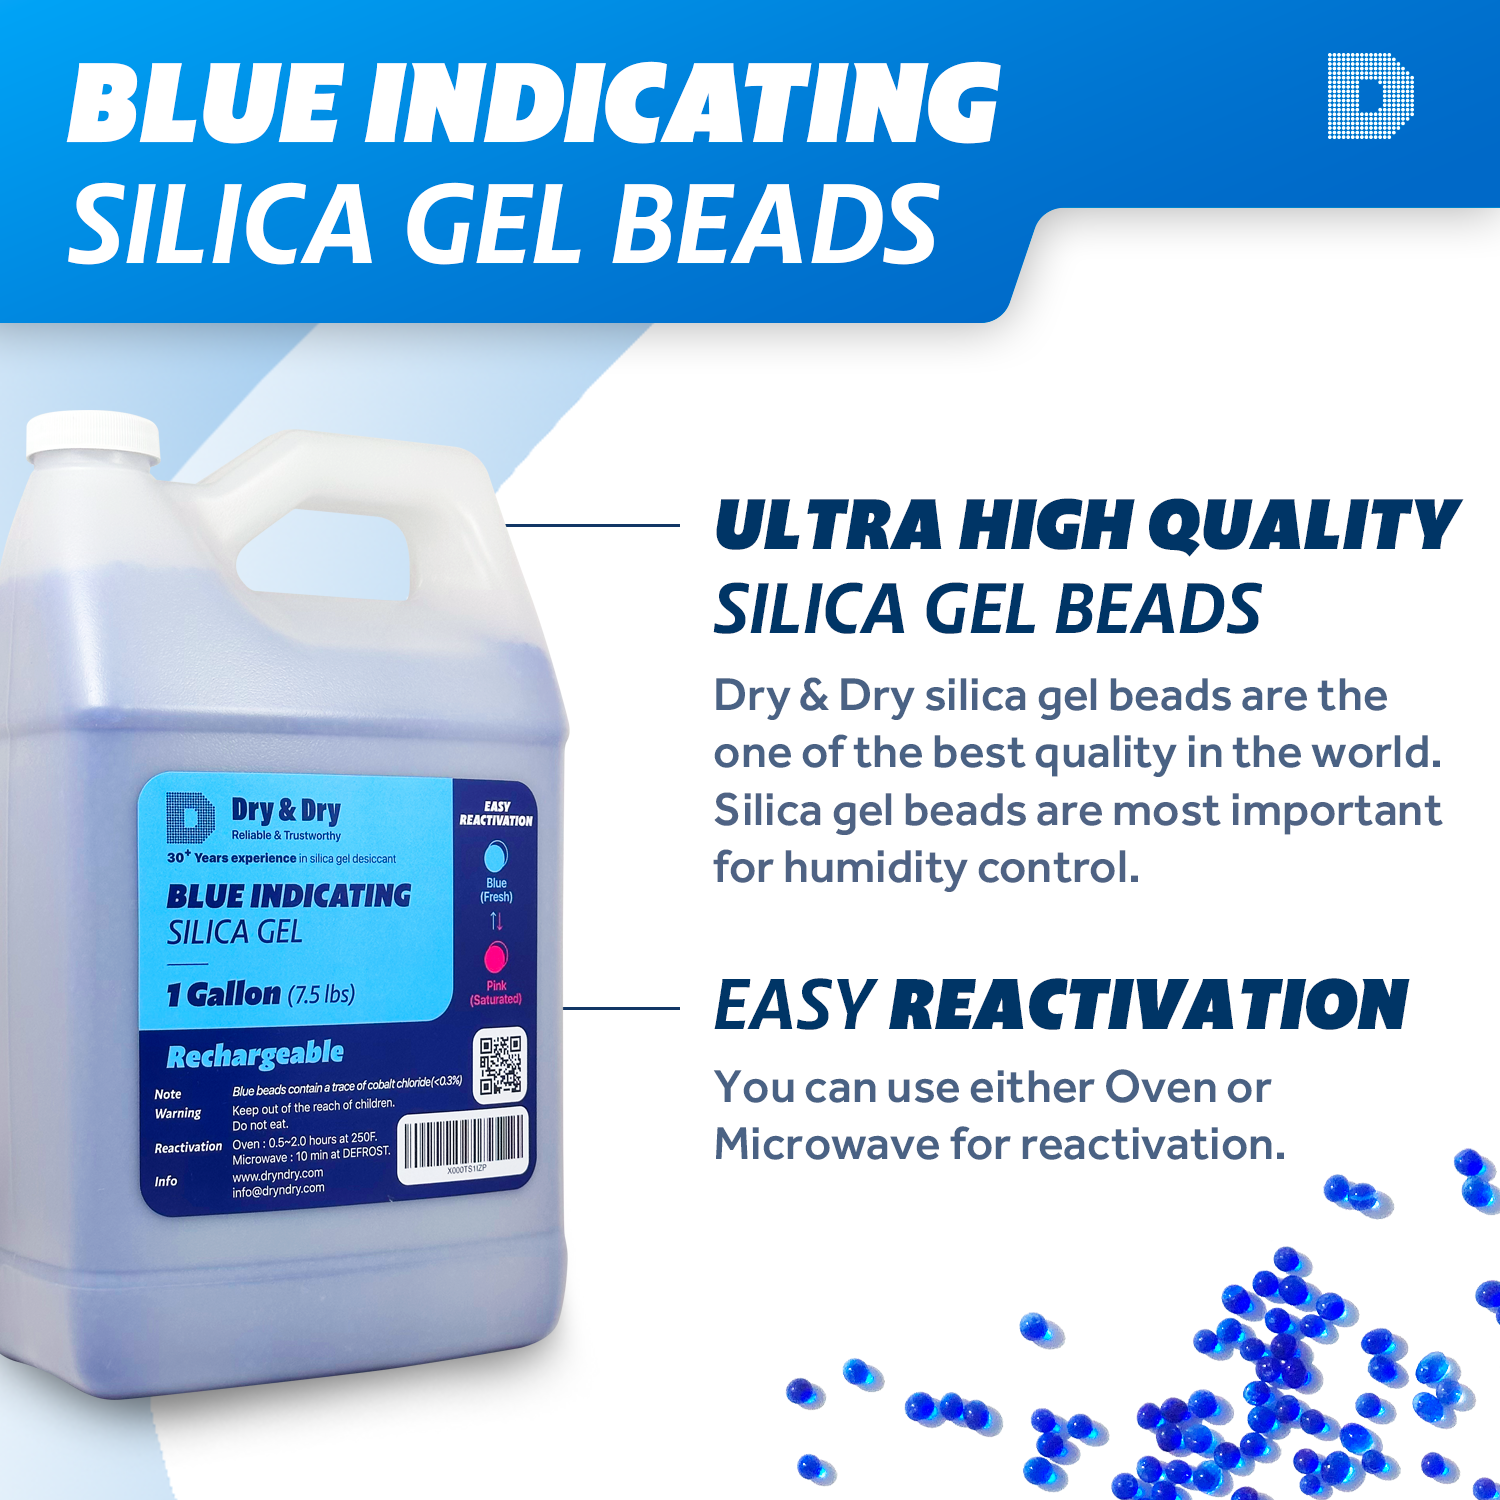 4 Gallon [30 LBS] Premium Blue Indicating Silica Gel Beads(Industry Standard 3-5 mm) - Rechargeable